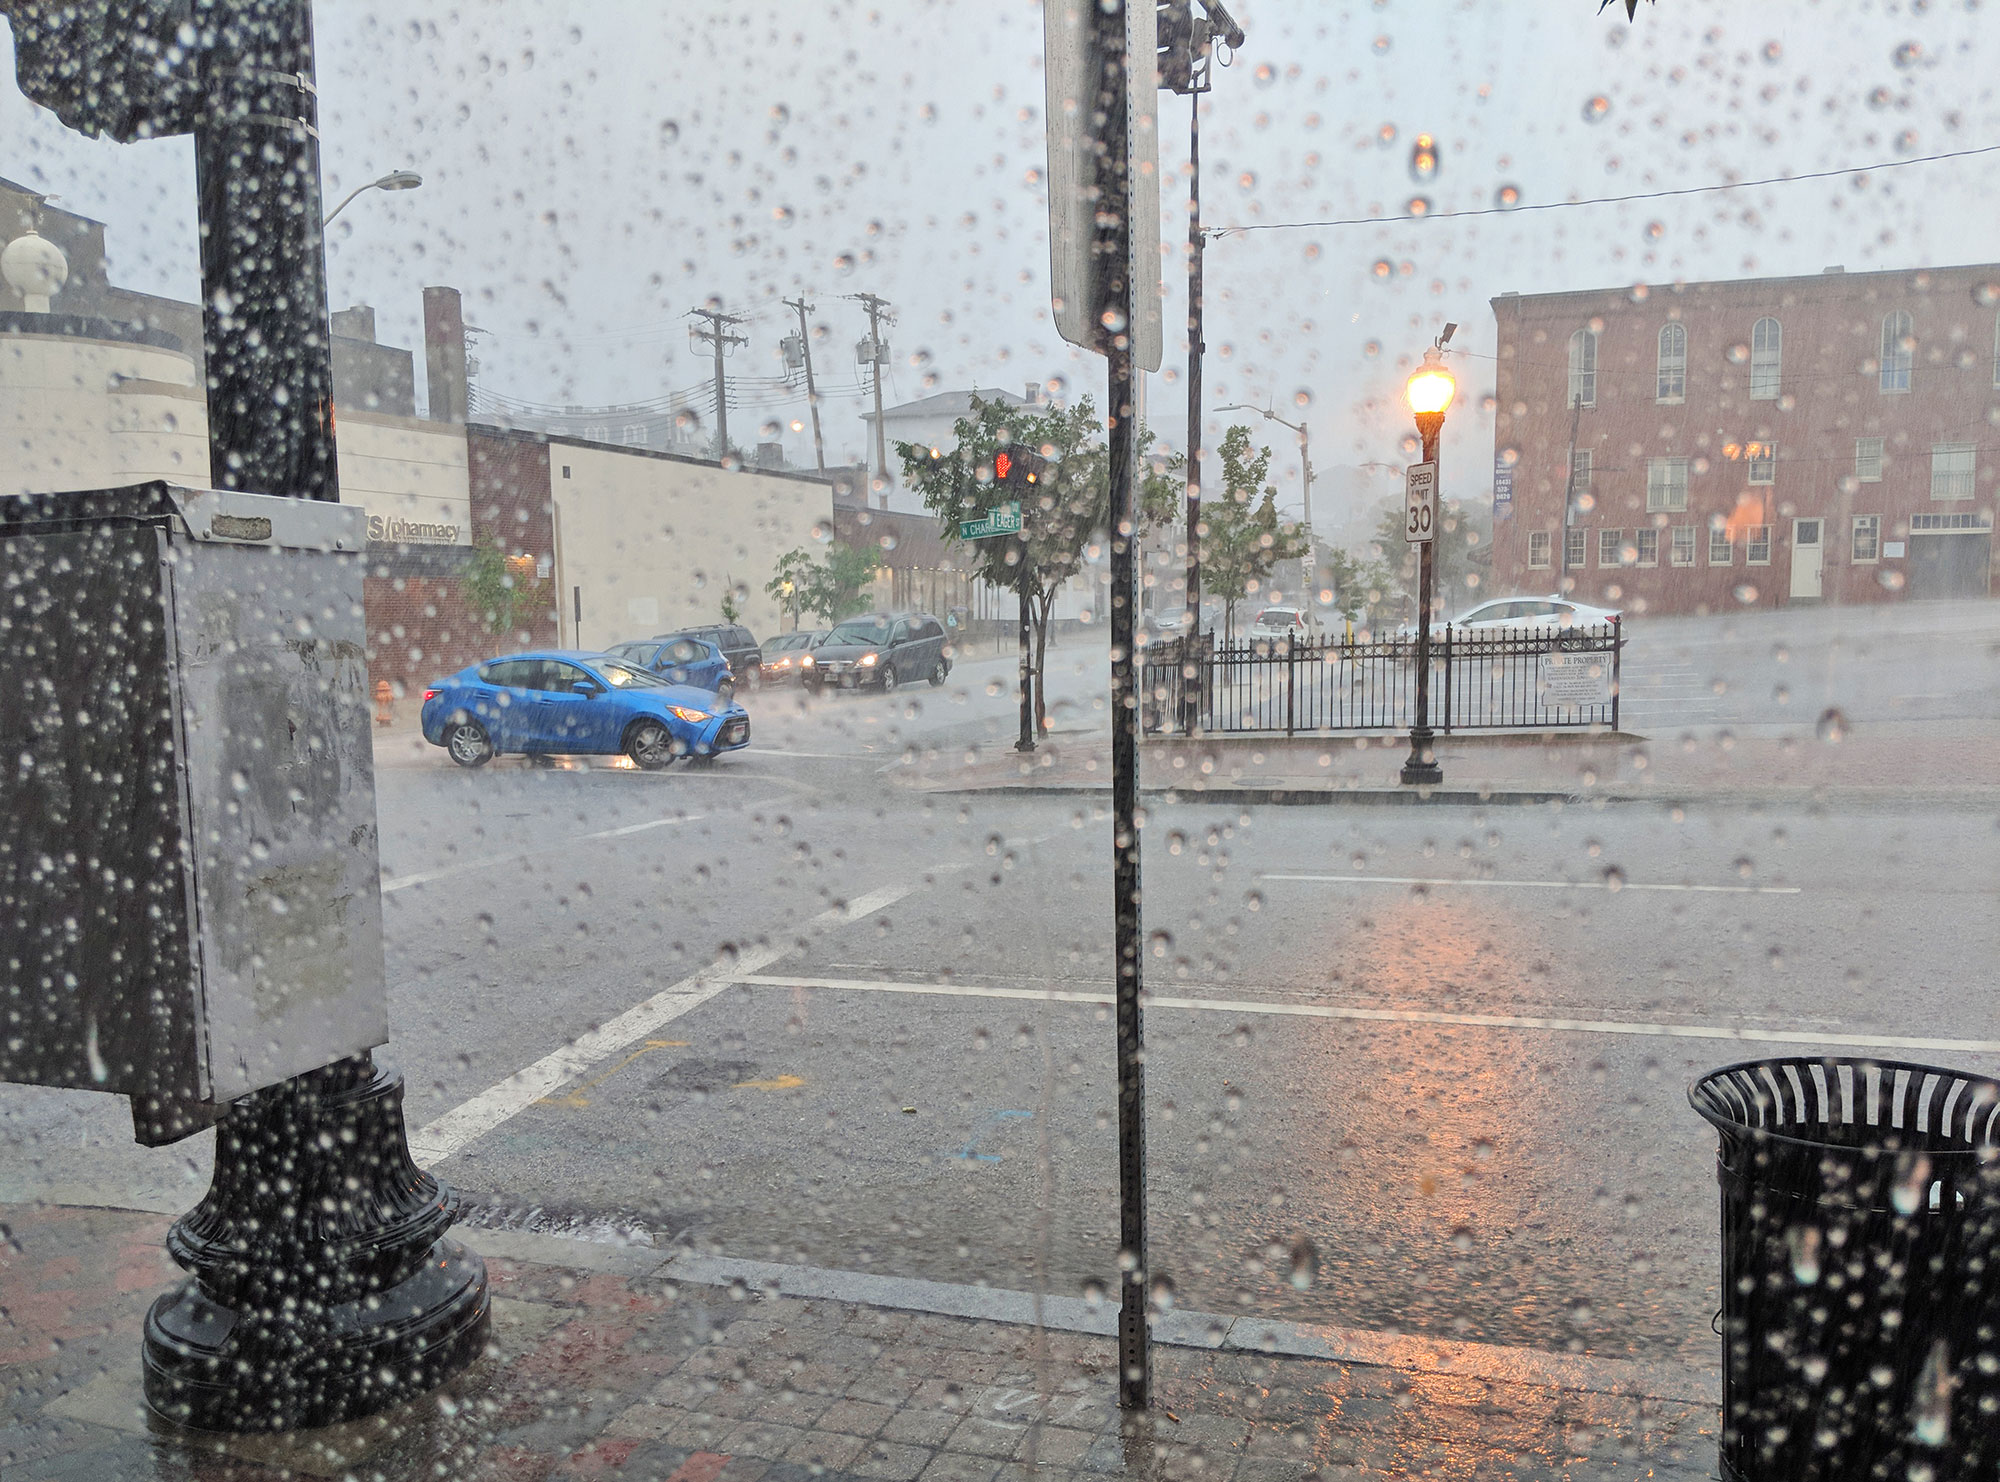 Downpour in downtown Baltimore, Maryland.